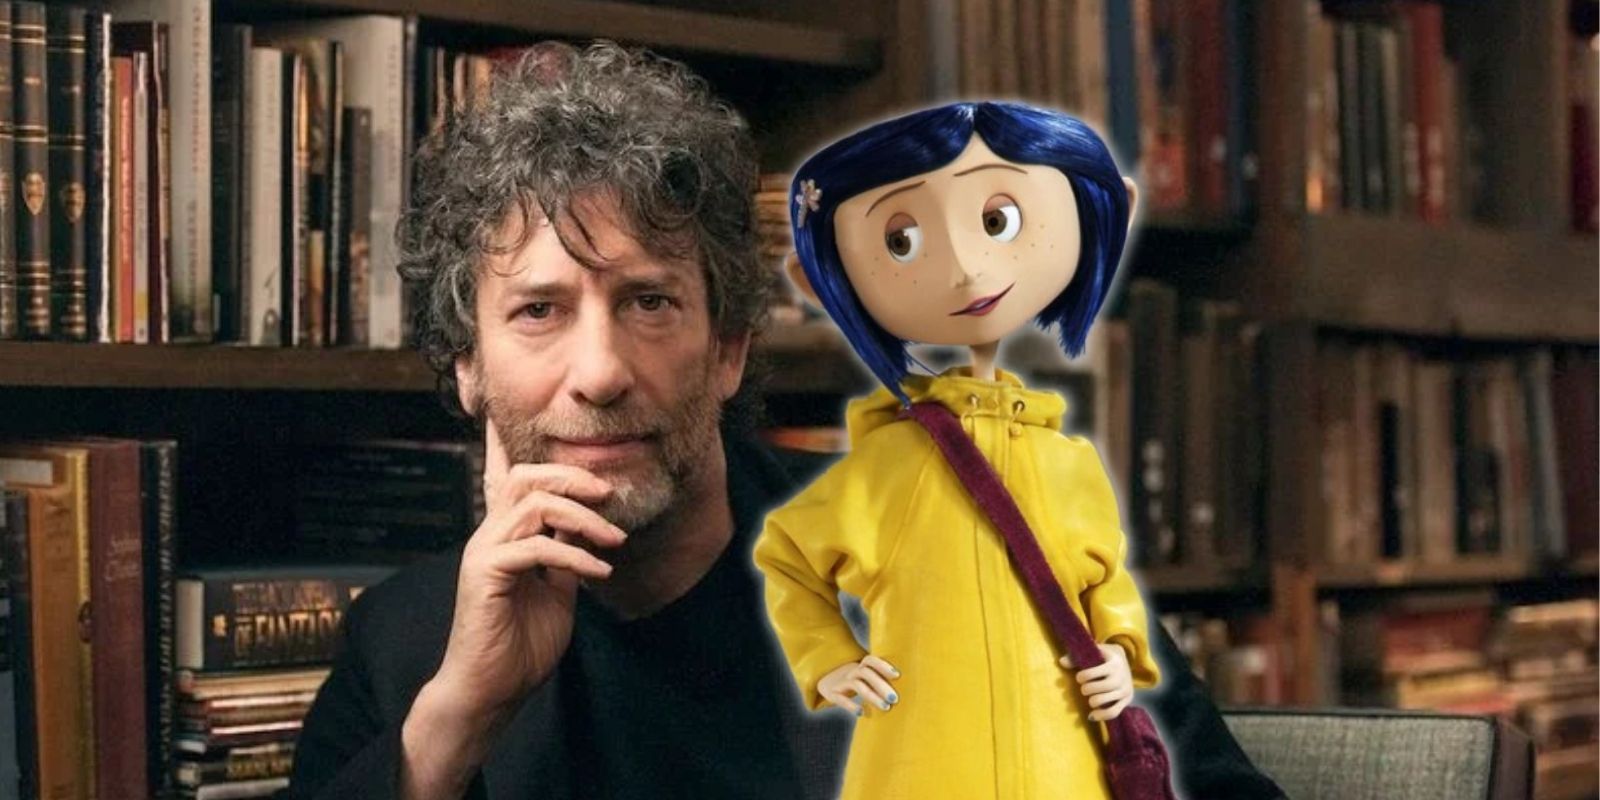 For the Discerning Neil Gaiman Fan: A Coraline Review - Smile